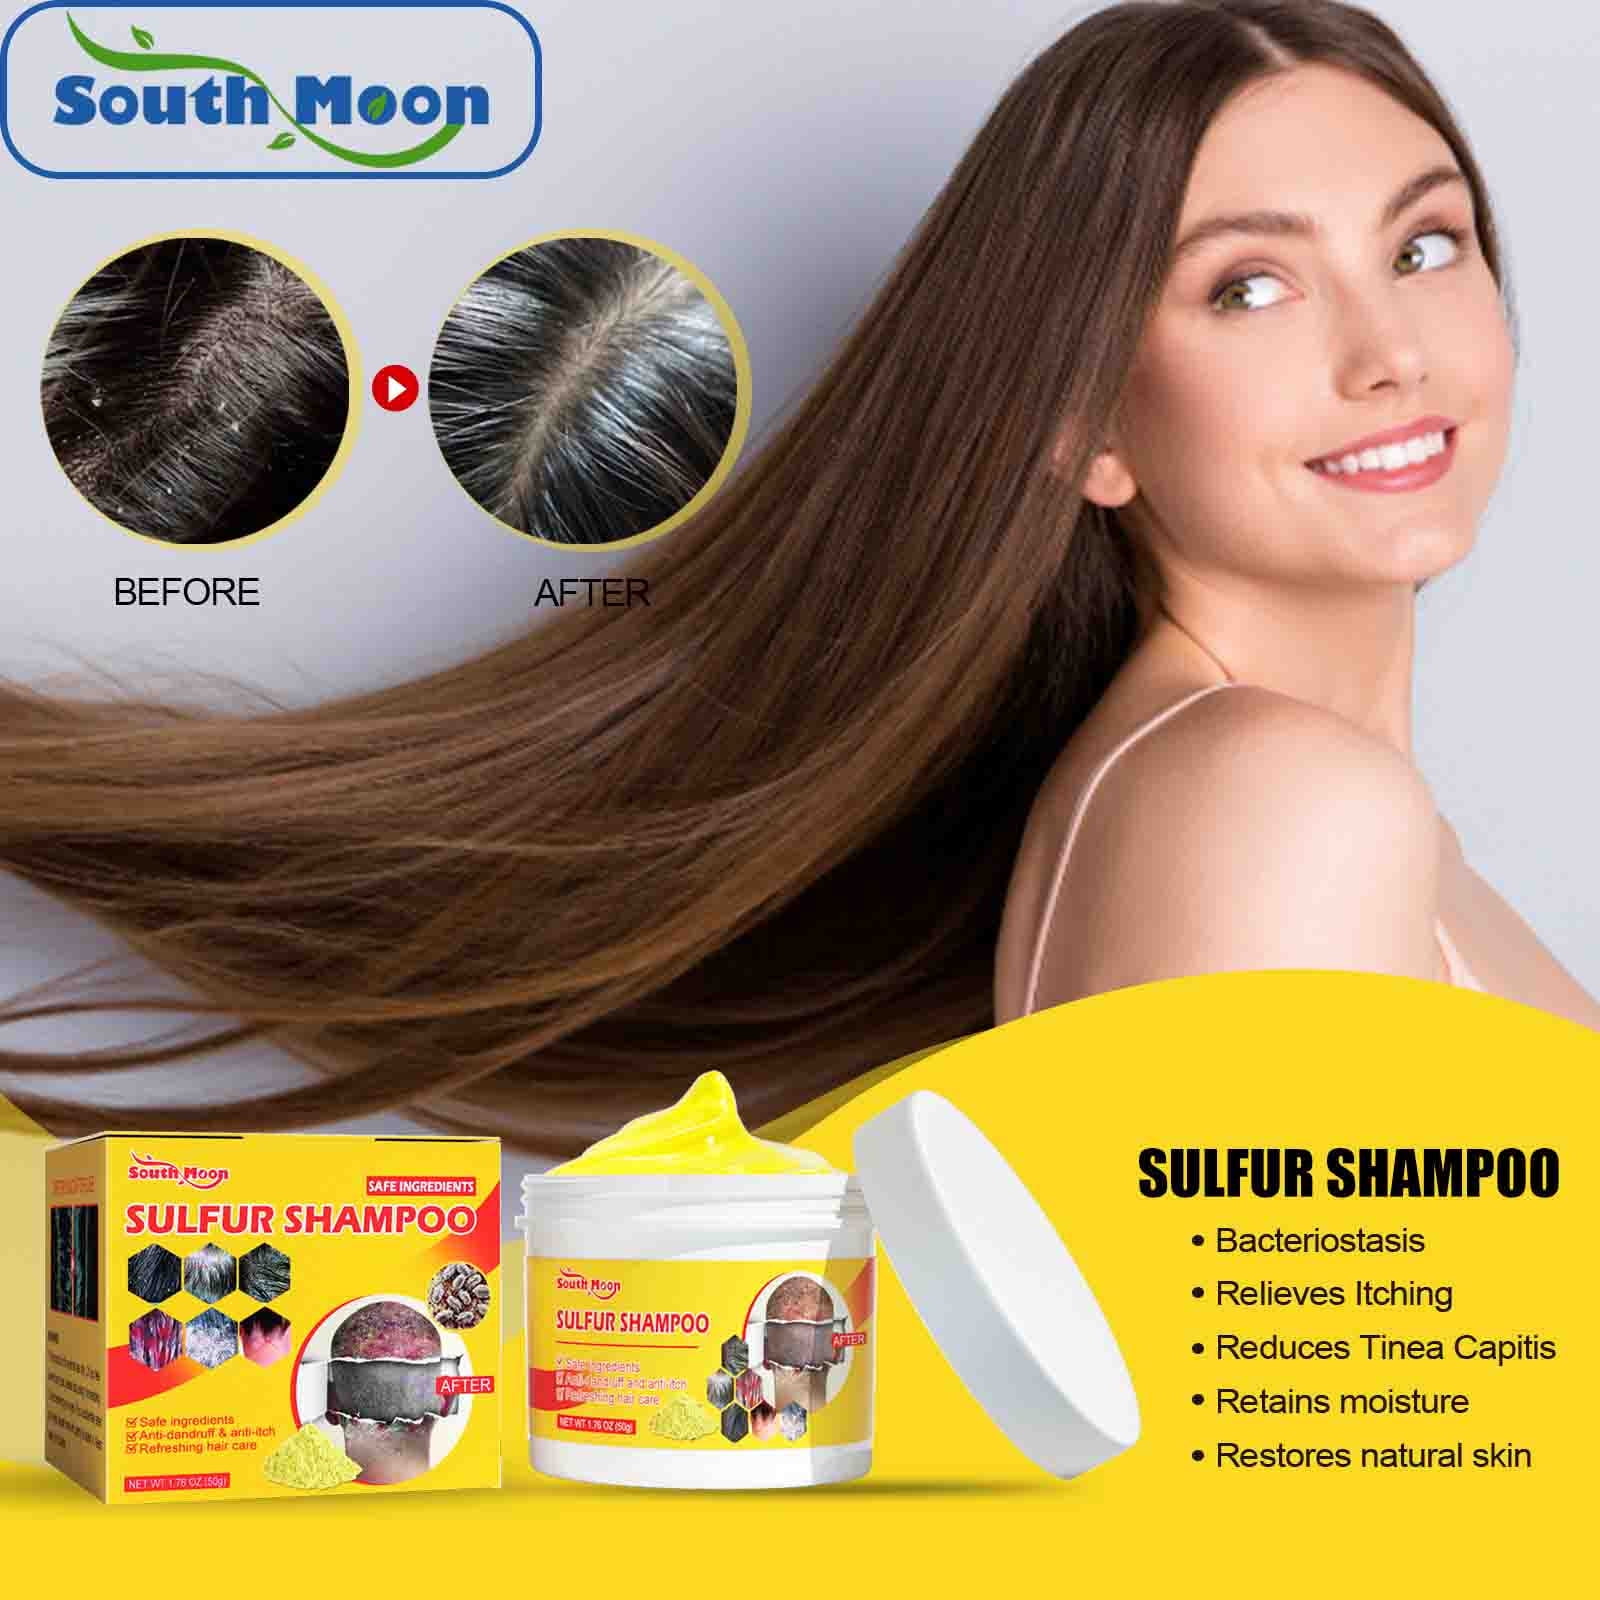 Sulfur Shampoo For Removing Lice, Relieving Itching, Controlling Oil,  Cleaning Hair Follicles, Removing Mites And Pimples, Scalp Care 50g -  